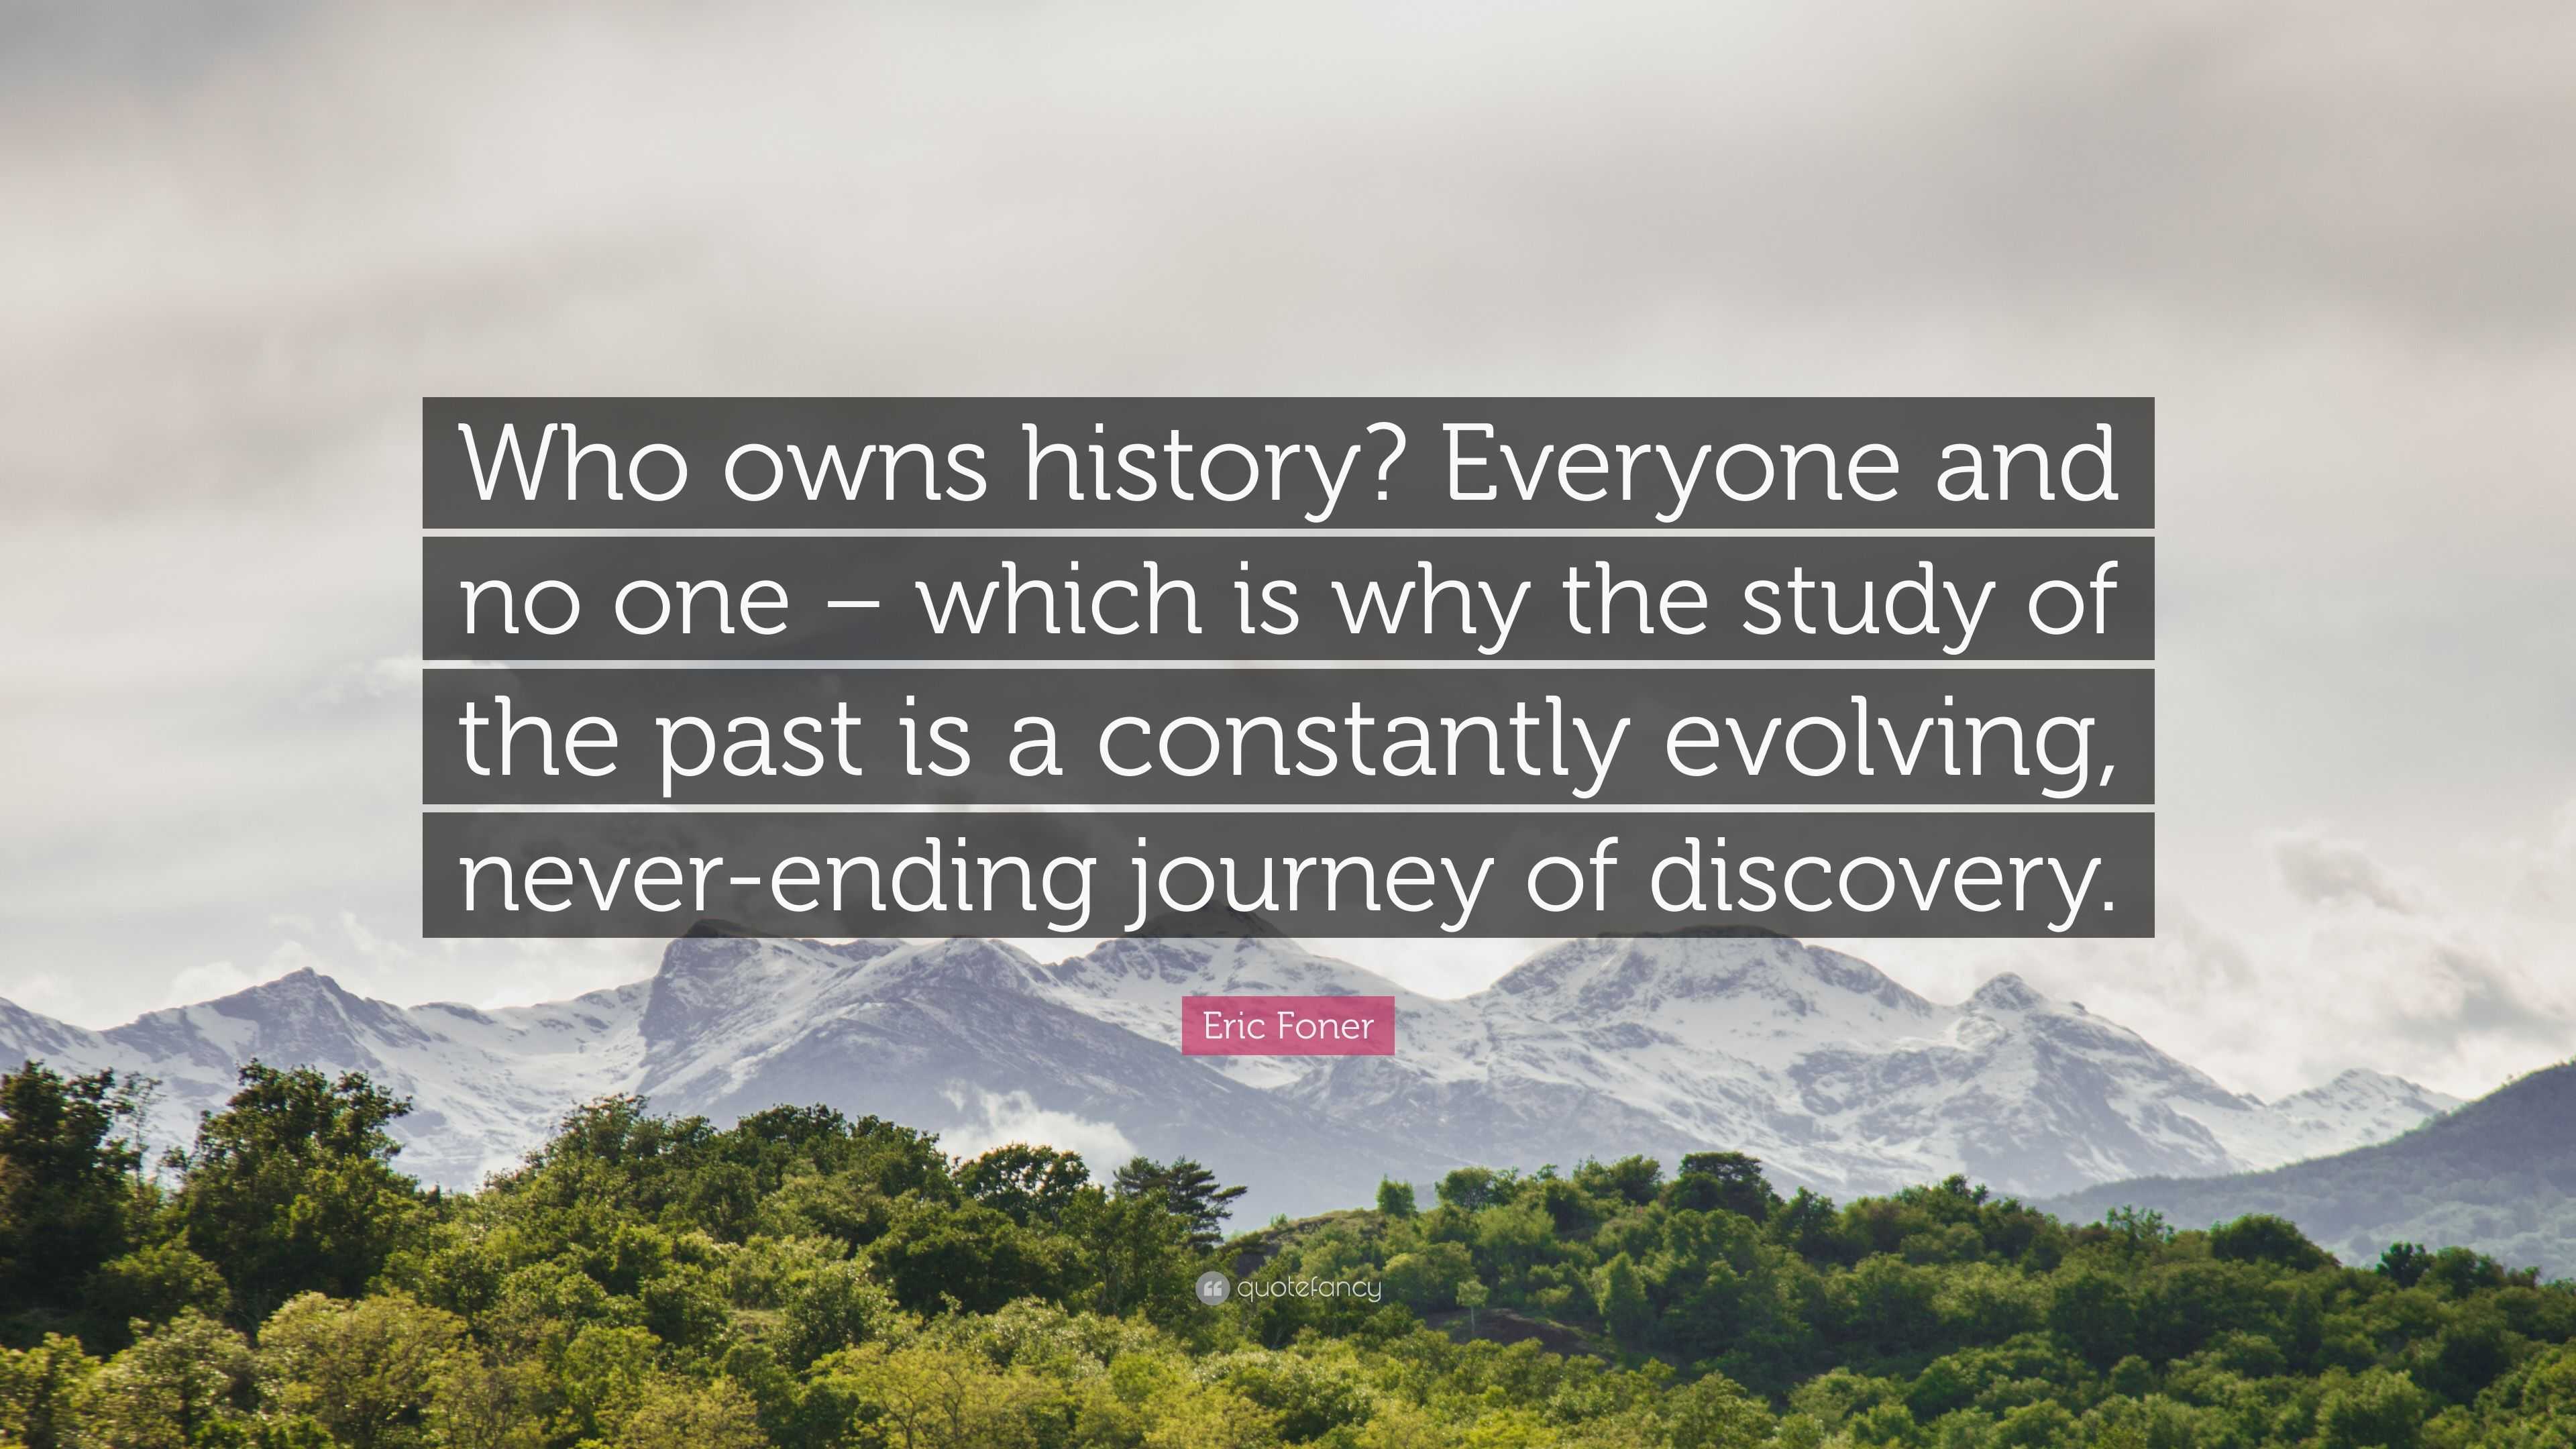 Eric Foner Quote: “Who owns history? Everyone and no one – which is why the  study of the past is a constantly evolving, never-ending journe”